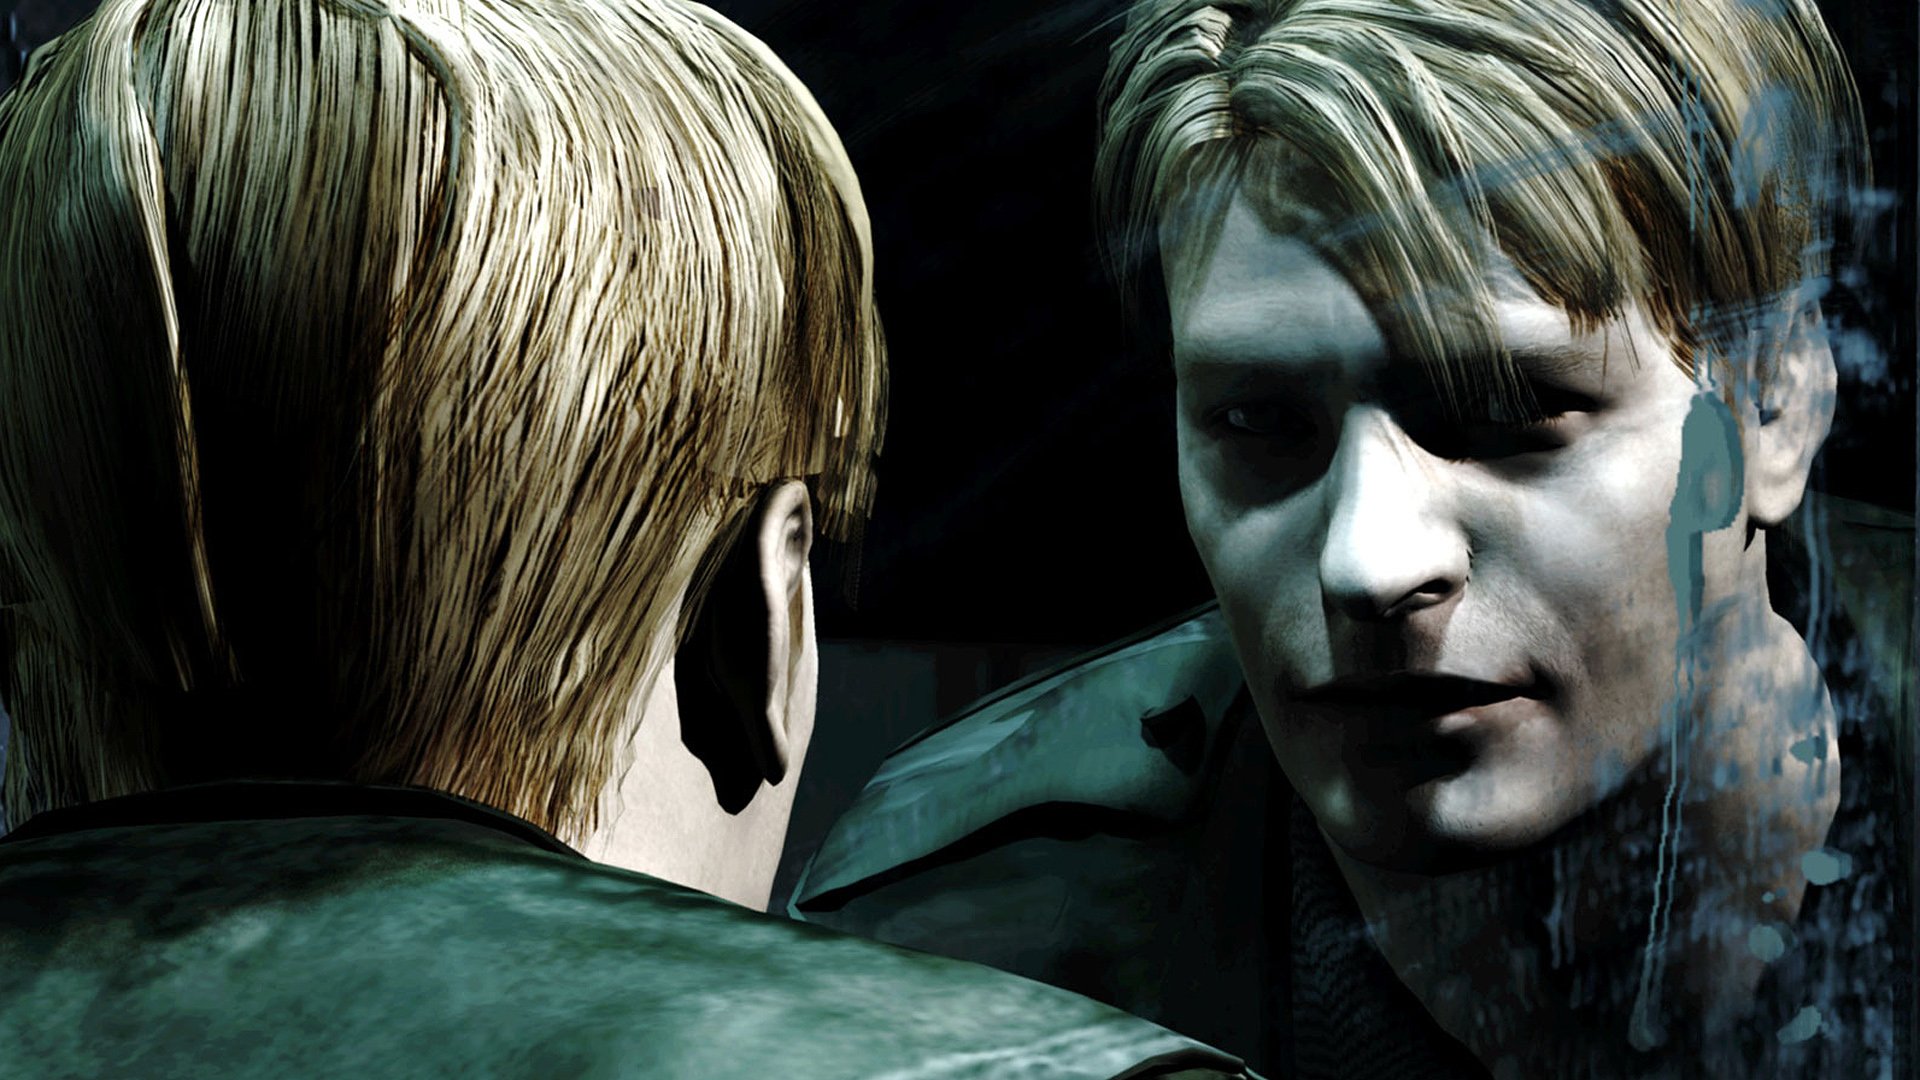 Silent Hill 2 HD Wallpaper | Background Image | 1920x1080 | ID:521735 - Wallpaper Abyss